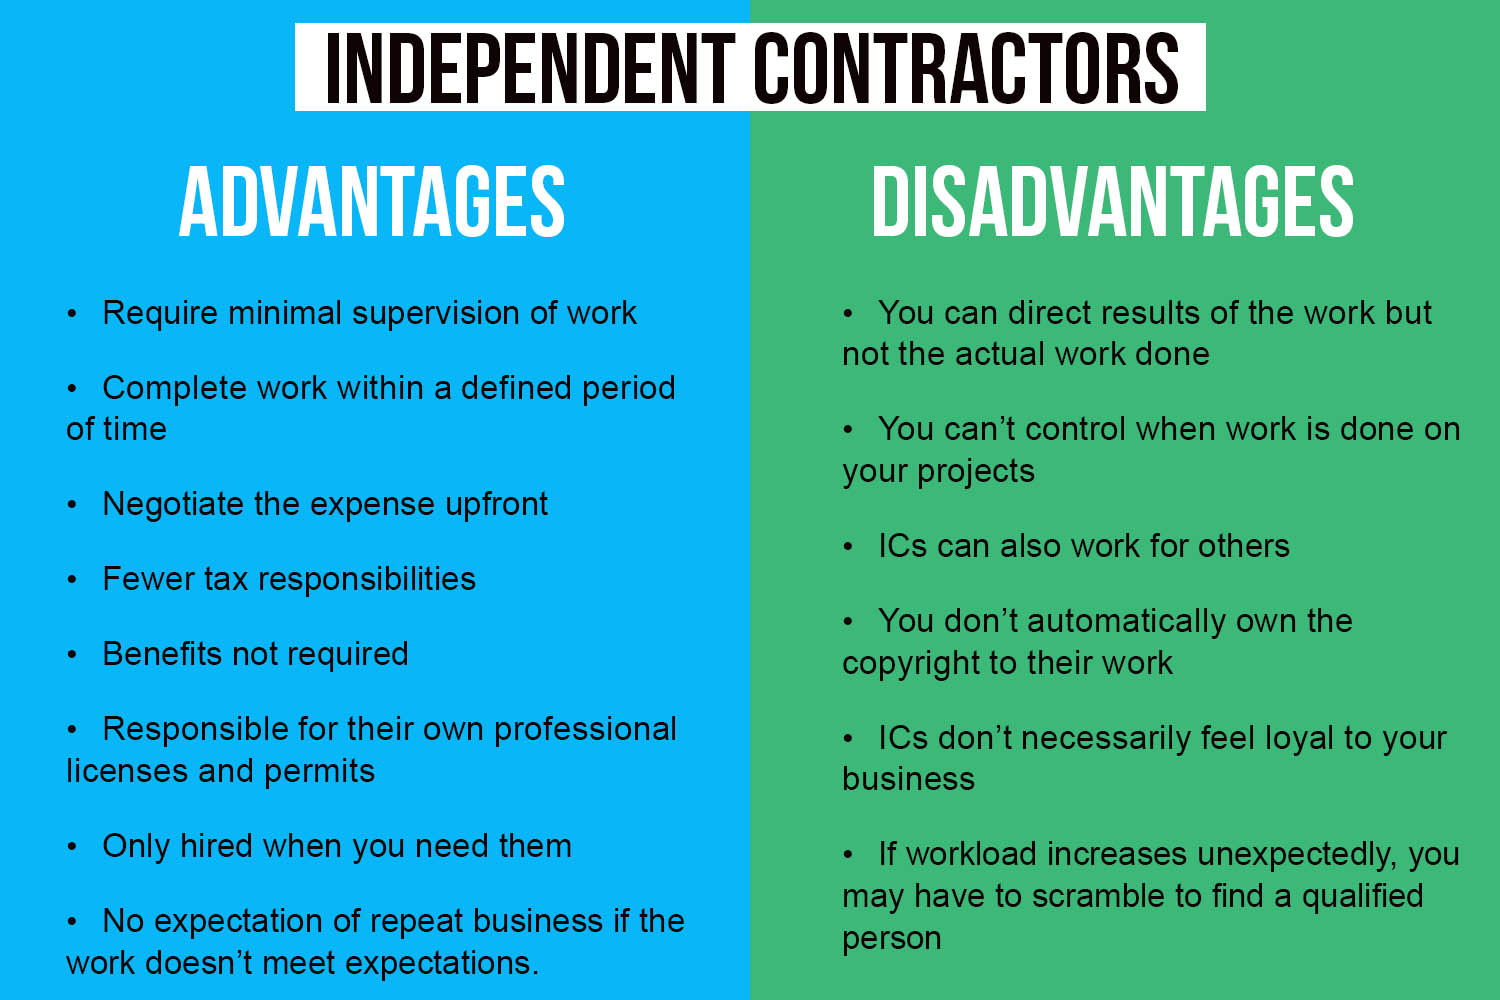 What are the pros and cons of being an independent contractor vs an